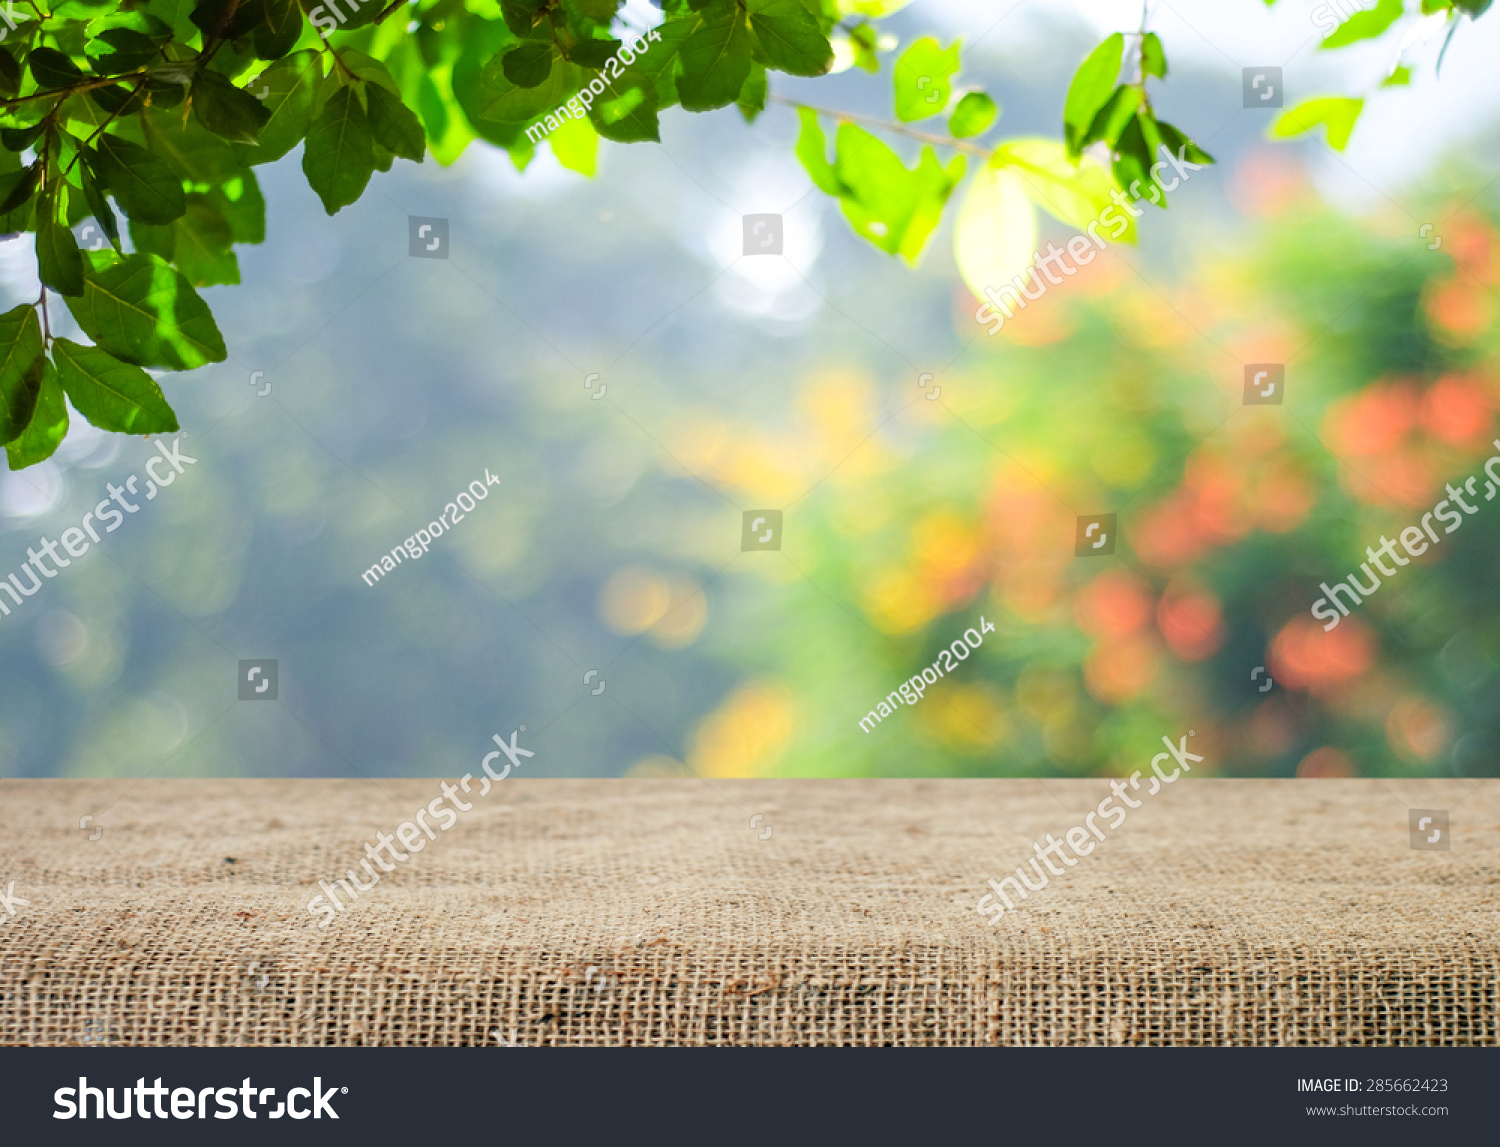 Nature background and table wood for product display template, Empty wooden table and  sack tablecloth over blur green tree at park, garden outdoor with bokeh light background #285662423